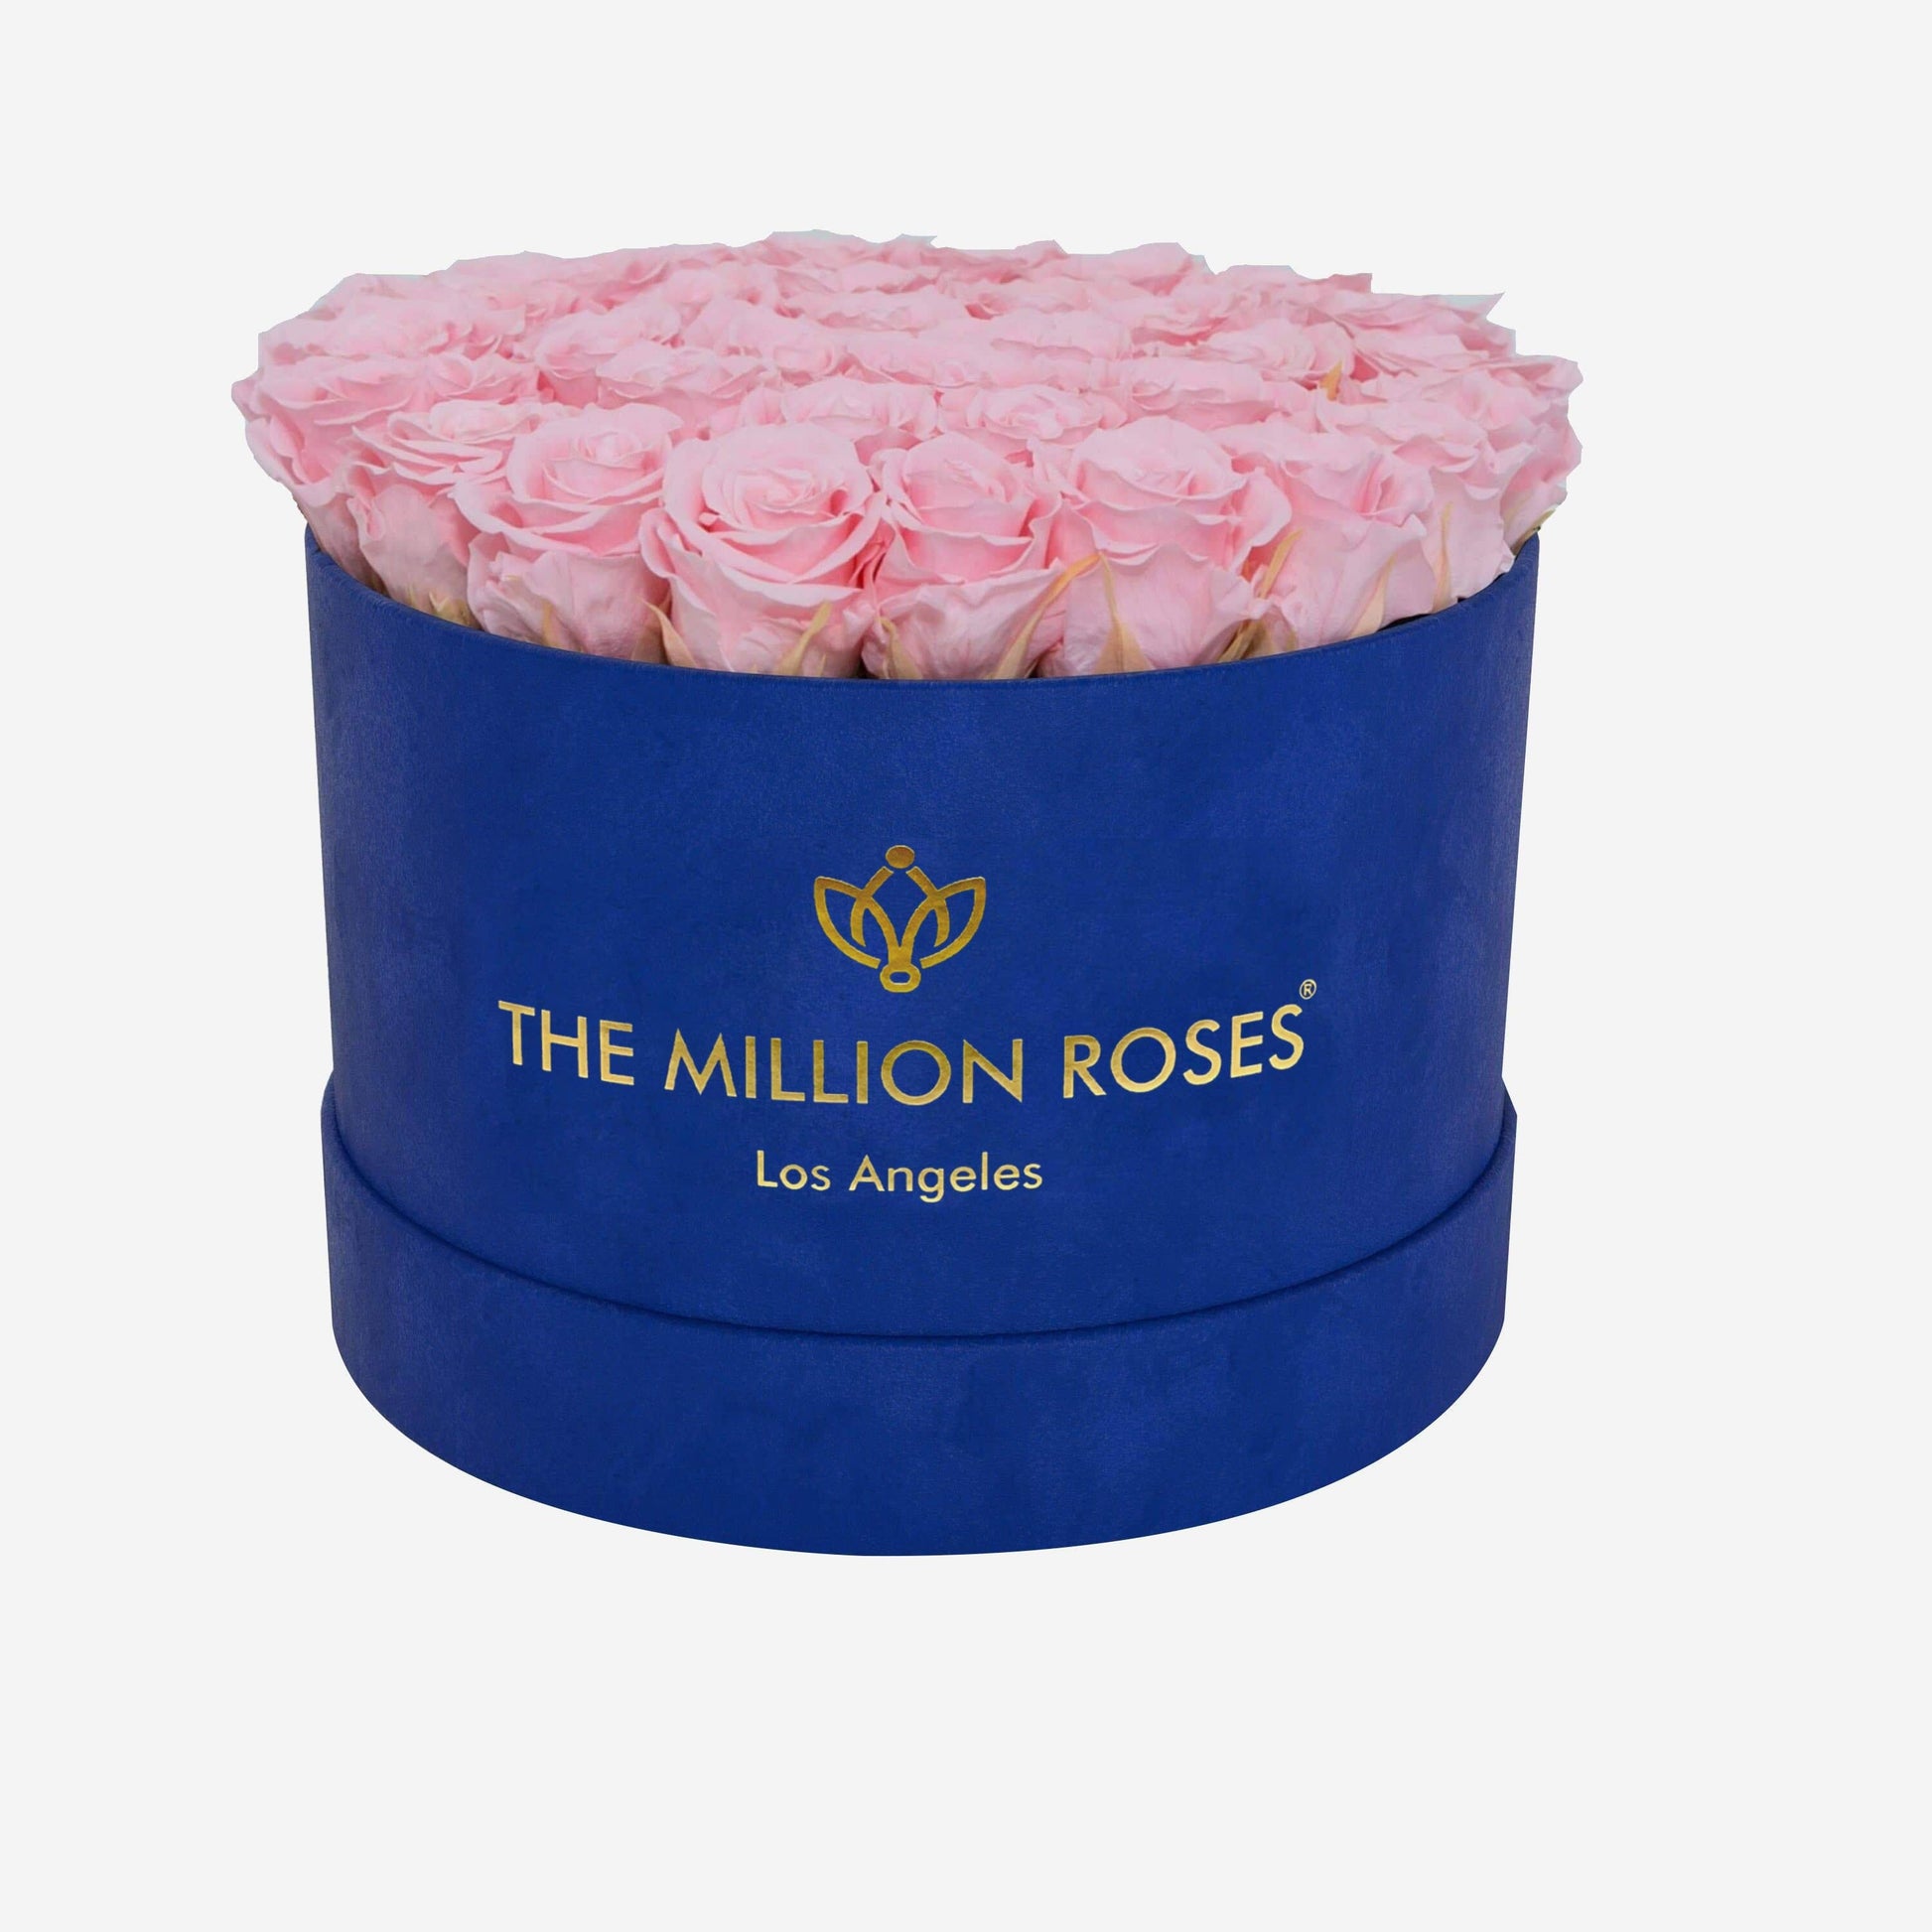 Supreme Royal Blue Suede Box | Light Pink Roses - The Million Roses